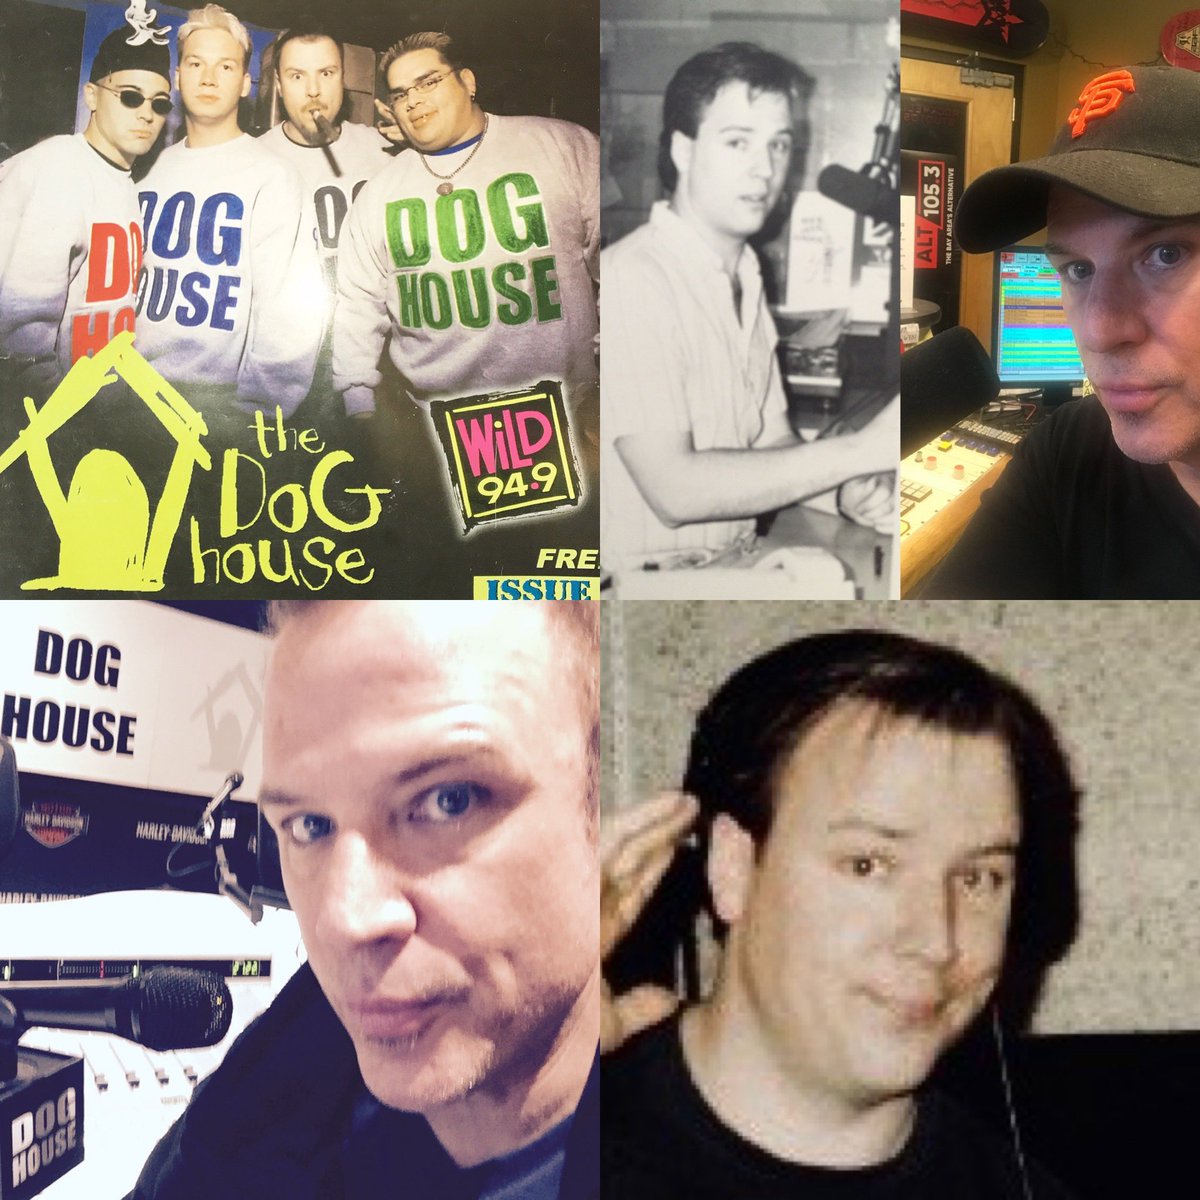 Happy National DJ Day! I did it for over 30 years and my time hosting The Dog House with @JV was the best times of my life.  I will new his spirit alive with everything I do.  Miss you my friend #doghouseforever #bayarea #thebestever #radio